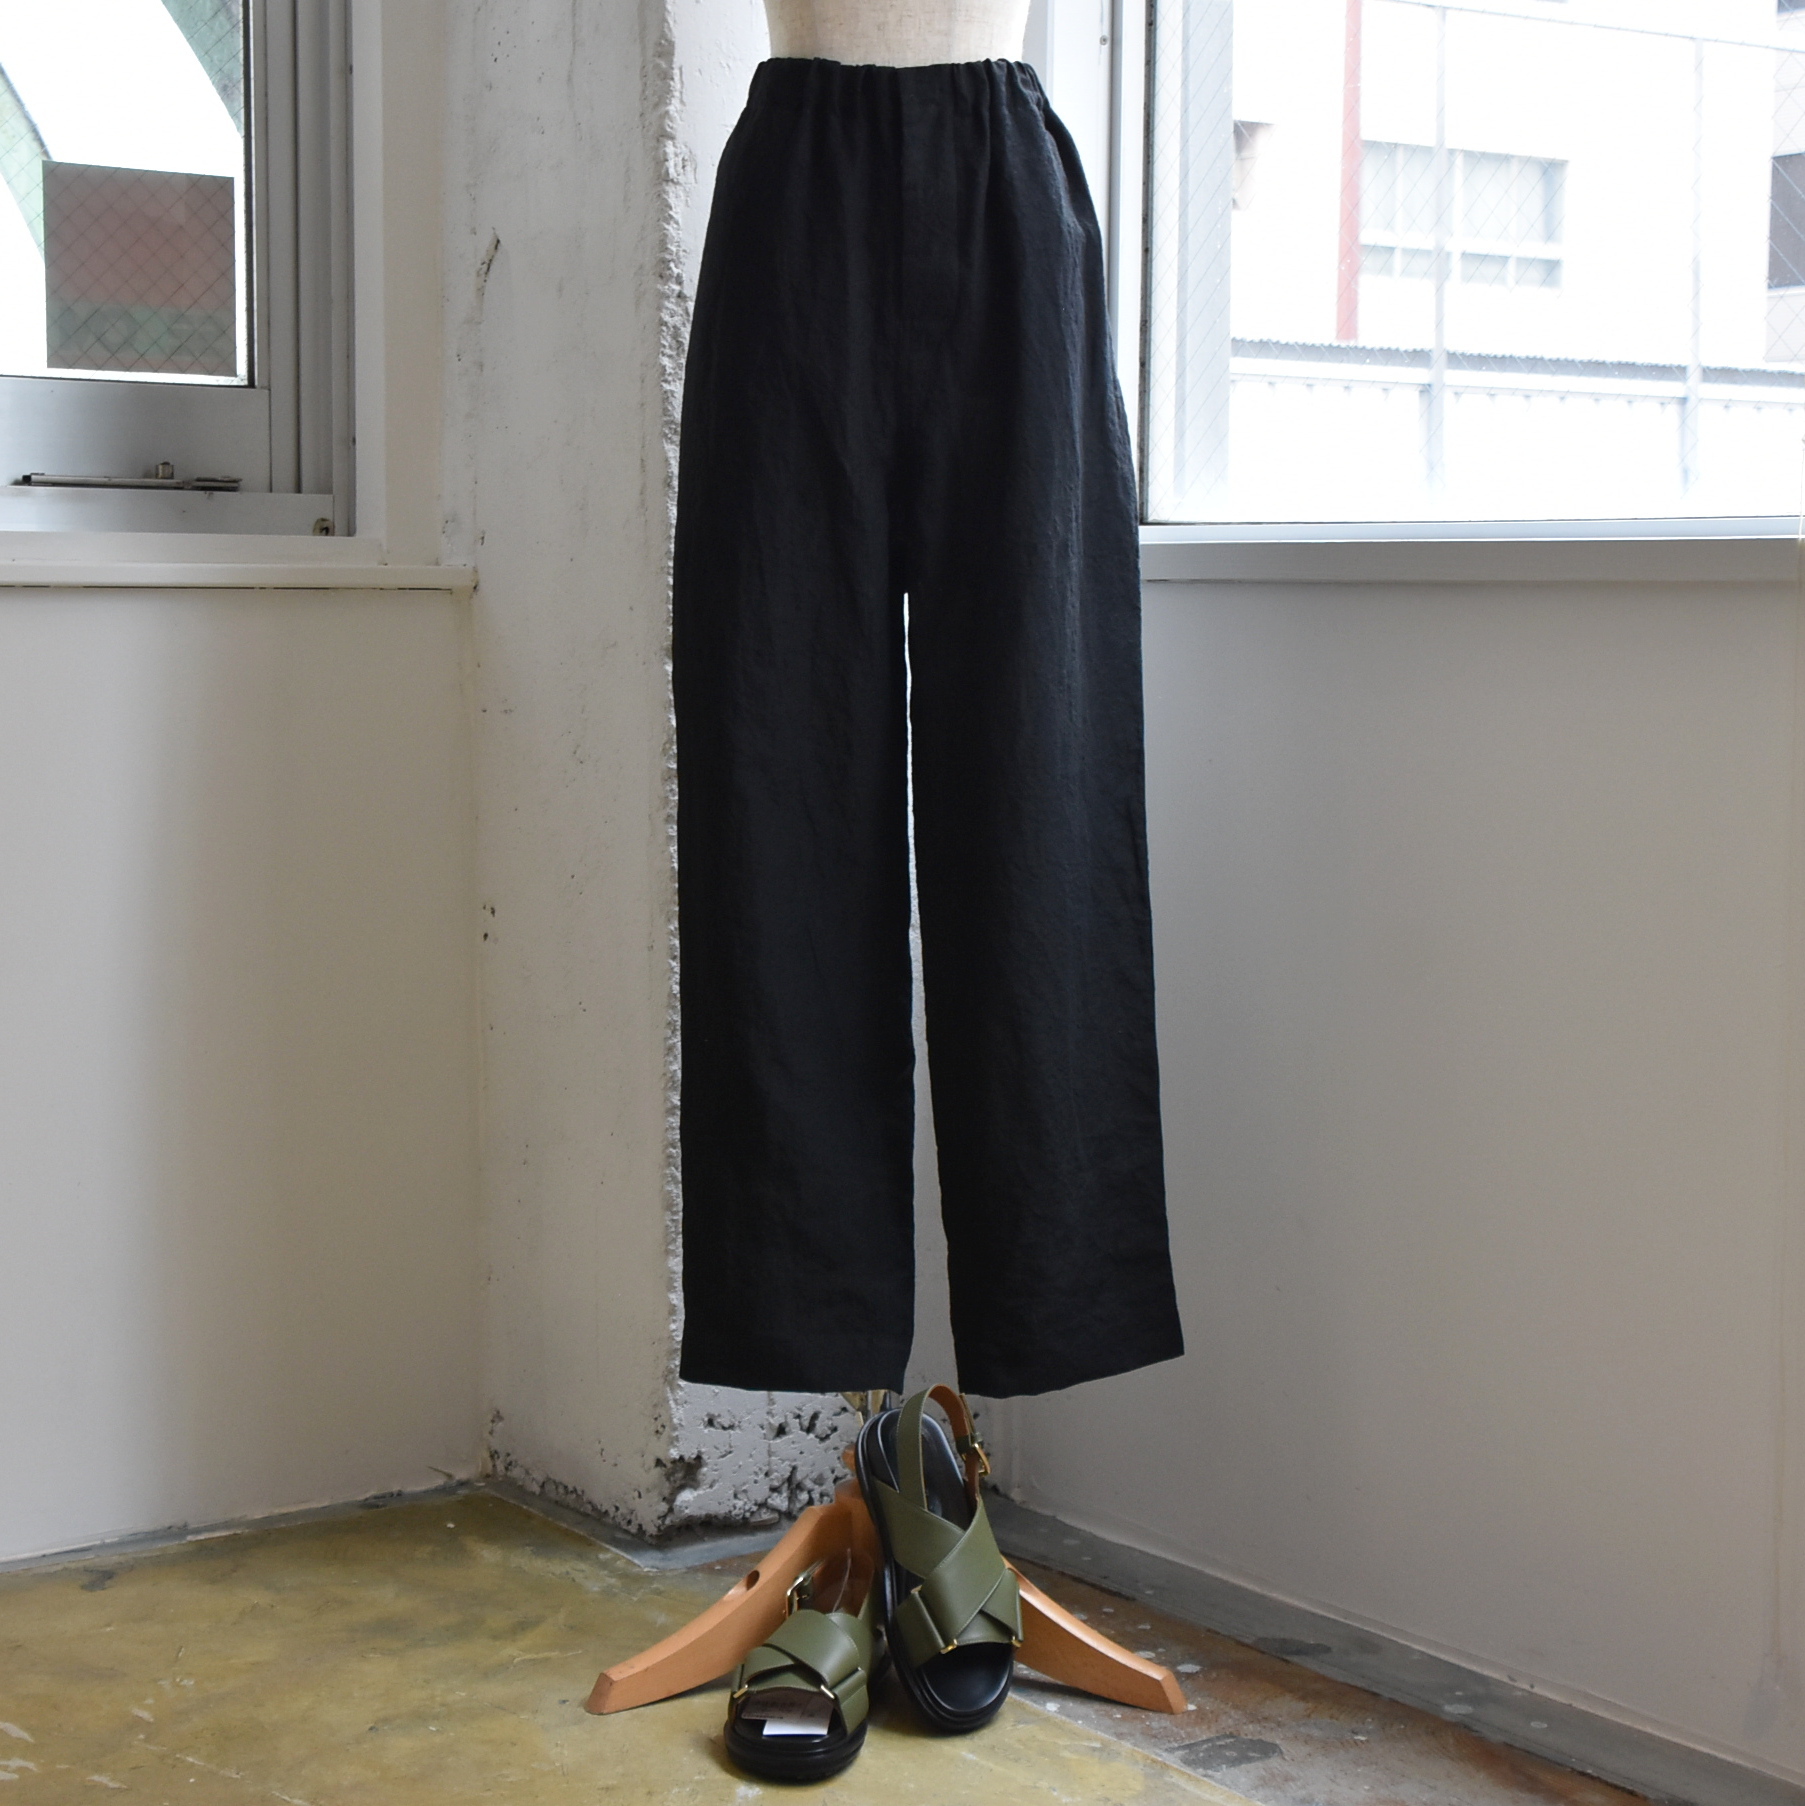 SOFIE D'HOORE(ソフィードール) / PIPERS Classic pants with elastic waist【3色展開】(1)